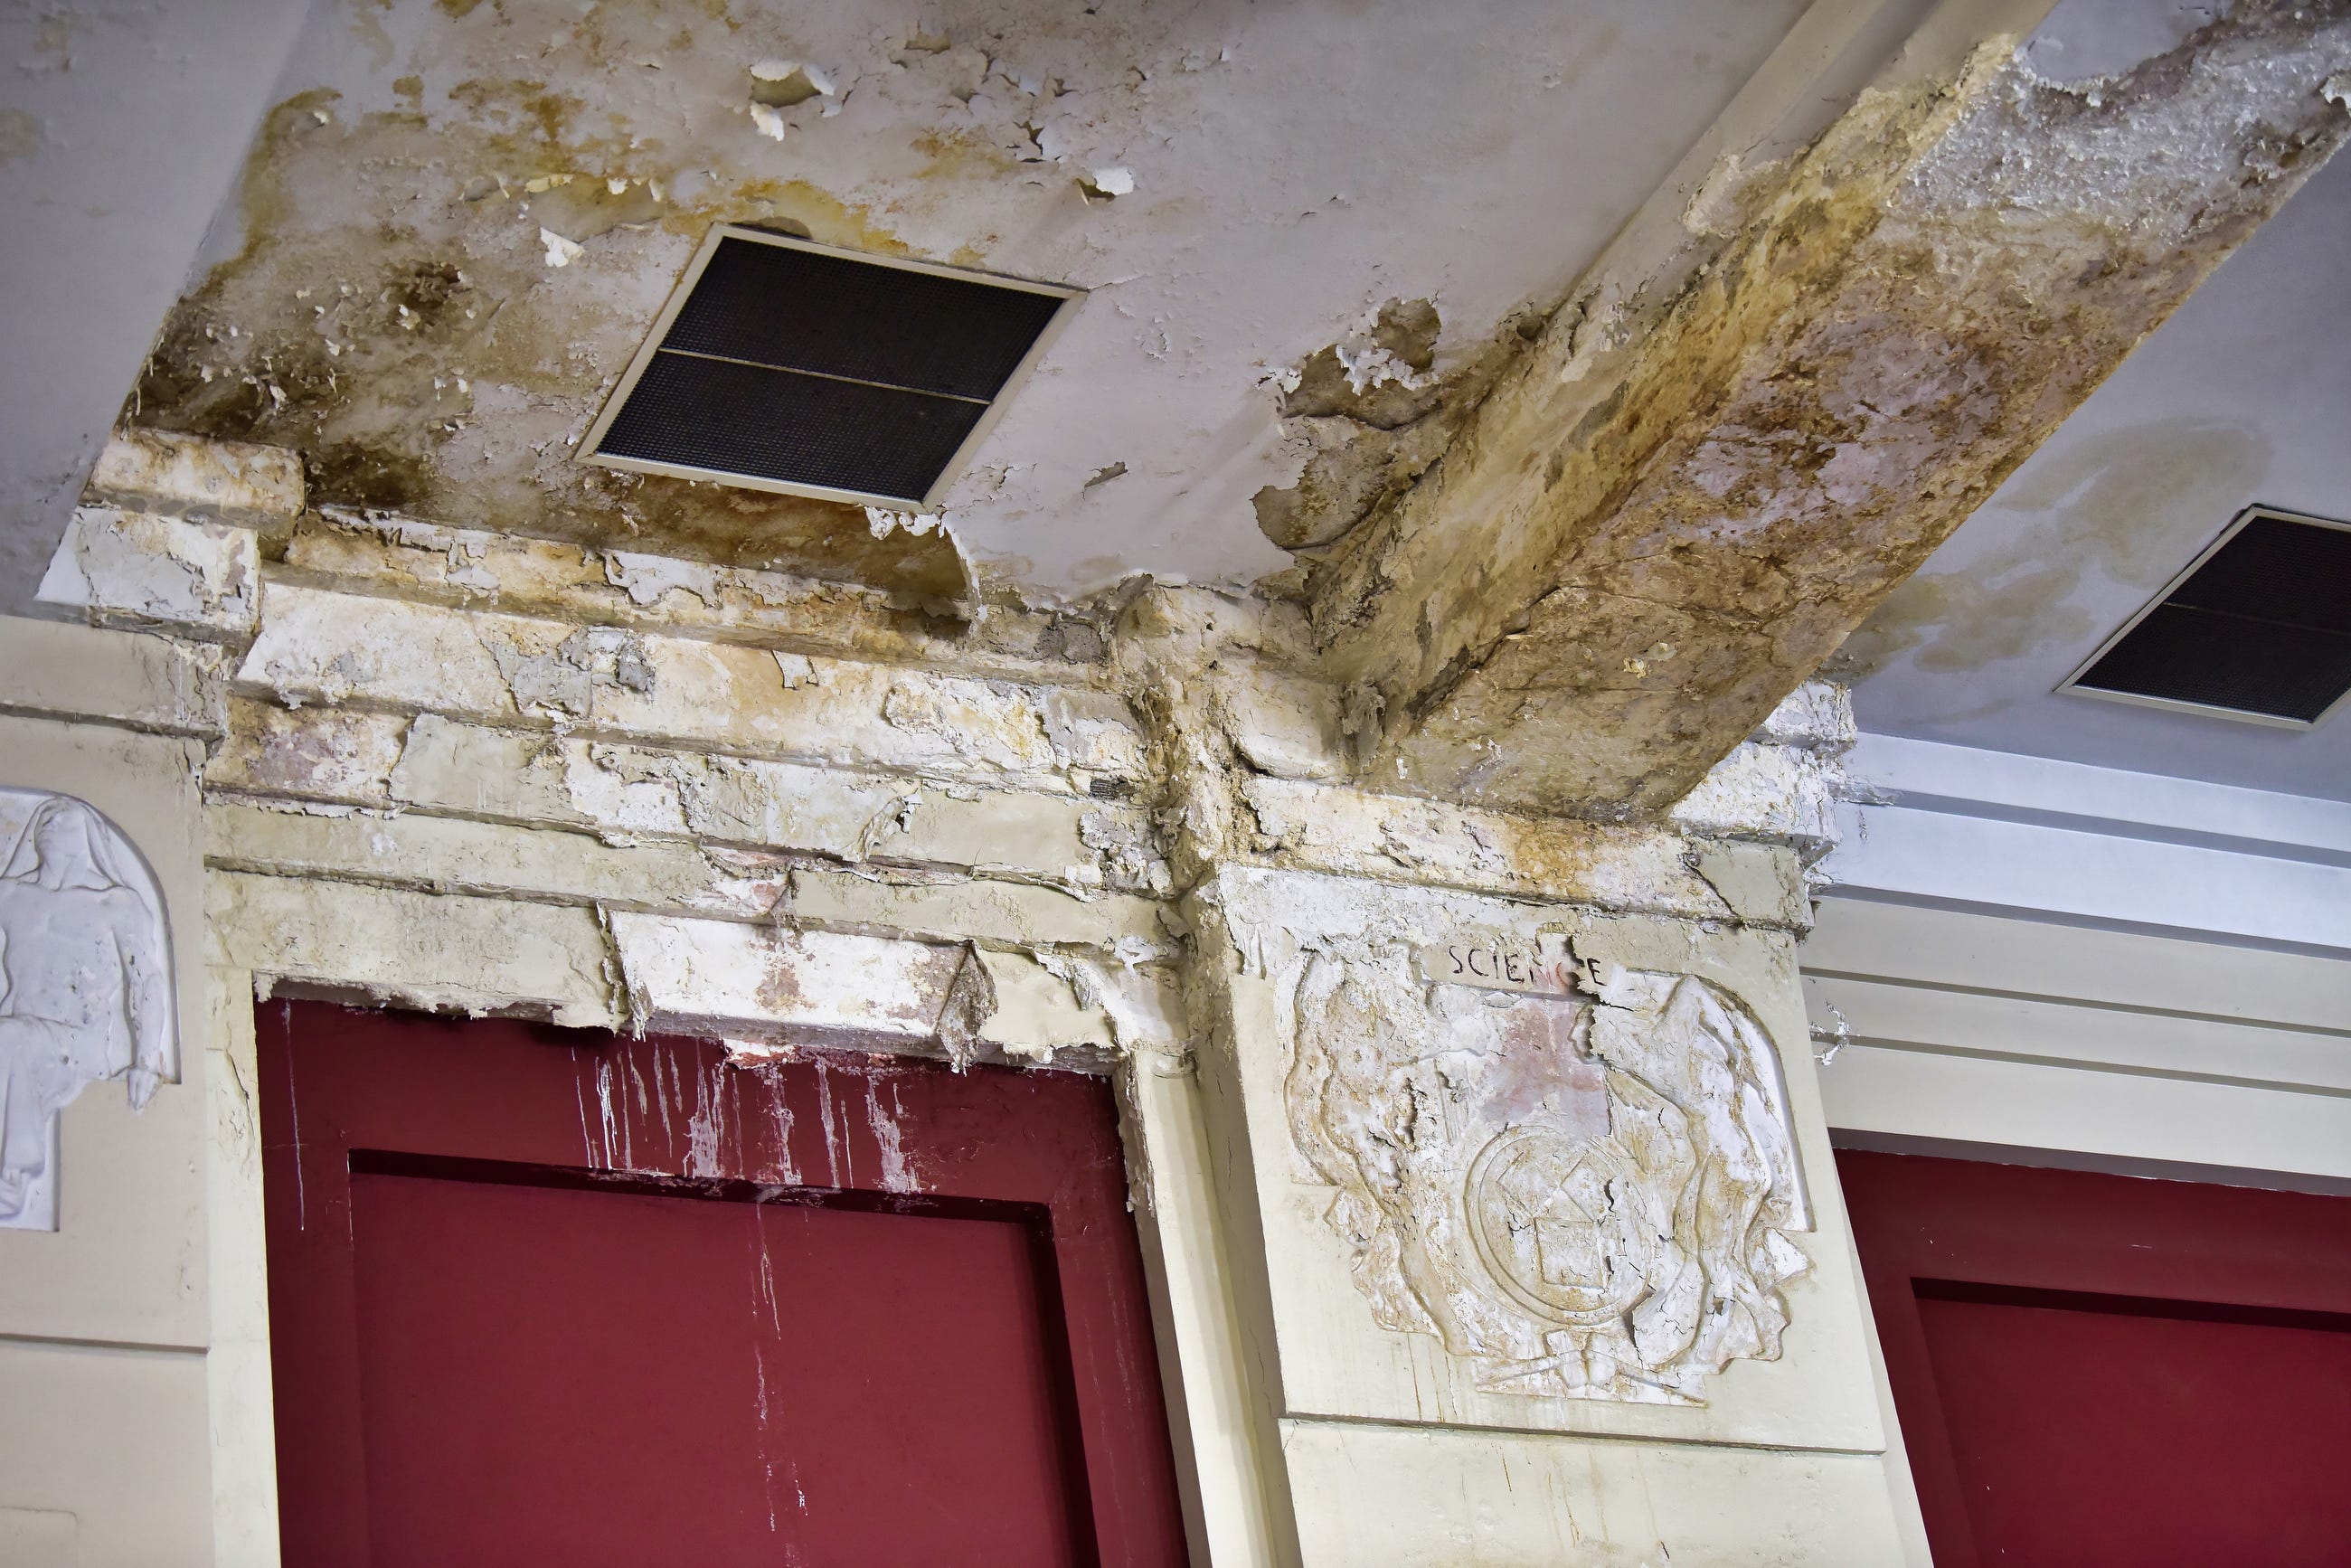 Water damage on the ceiling in the auditorium at Paterson's School 5, caused by a persistently leaky roof.